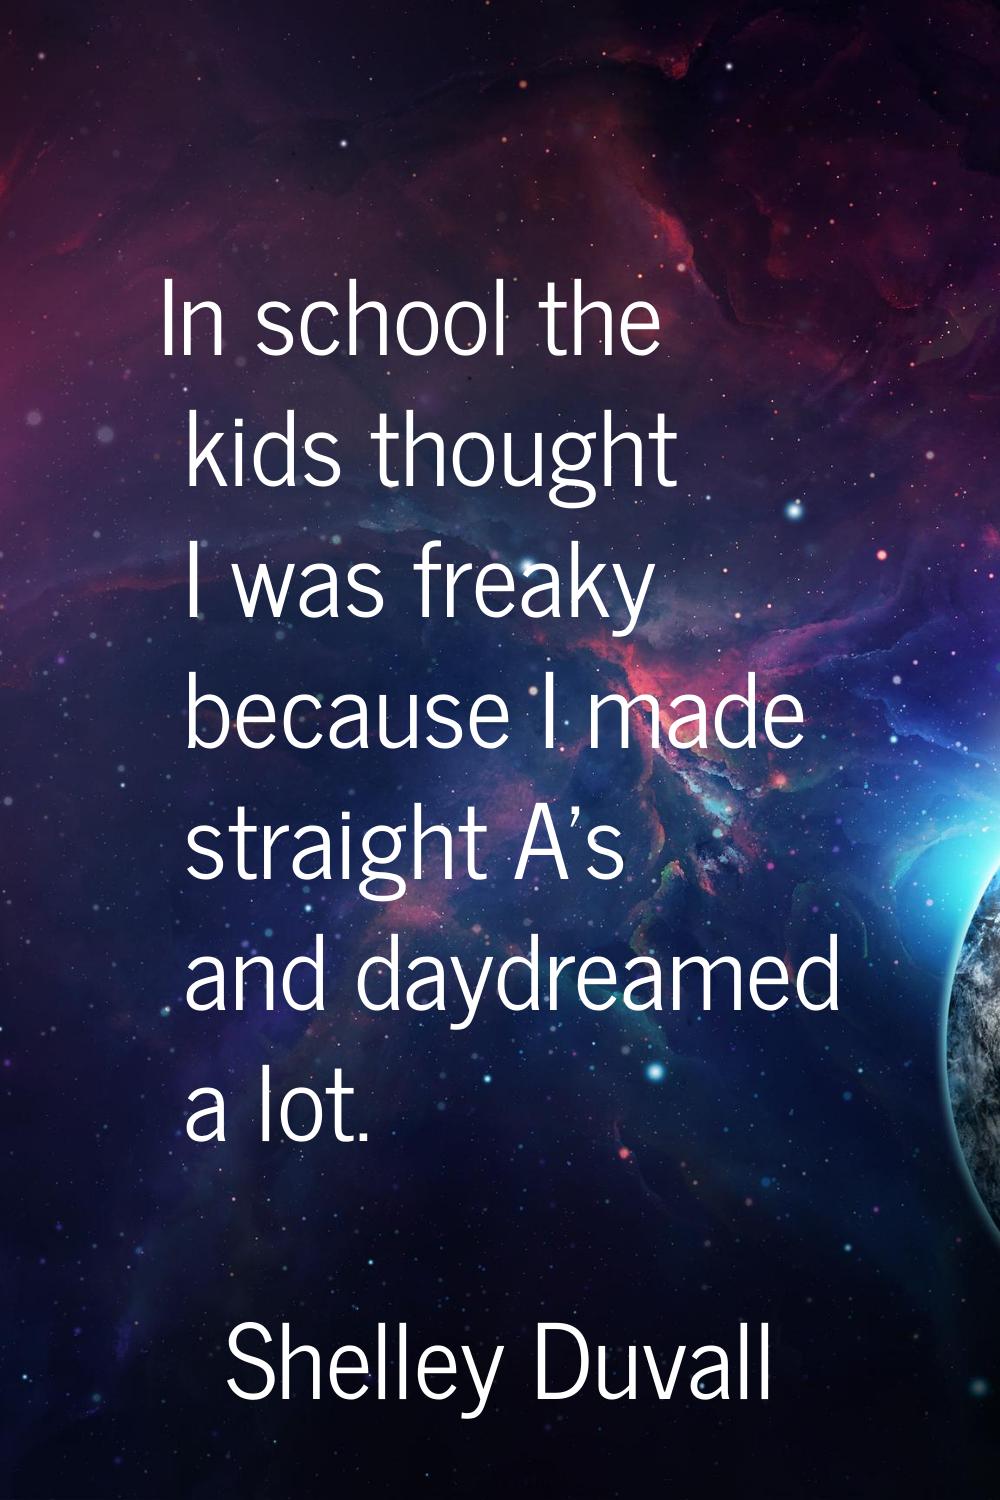 In school the kids thought I was freaky because I made straight A's and daydreamed a lot.